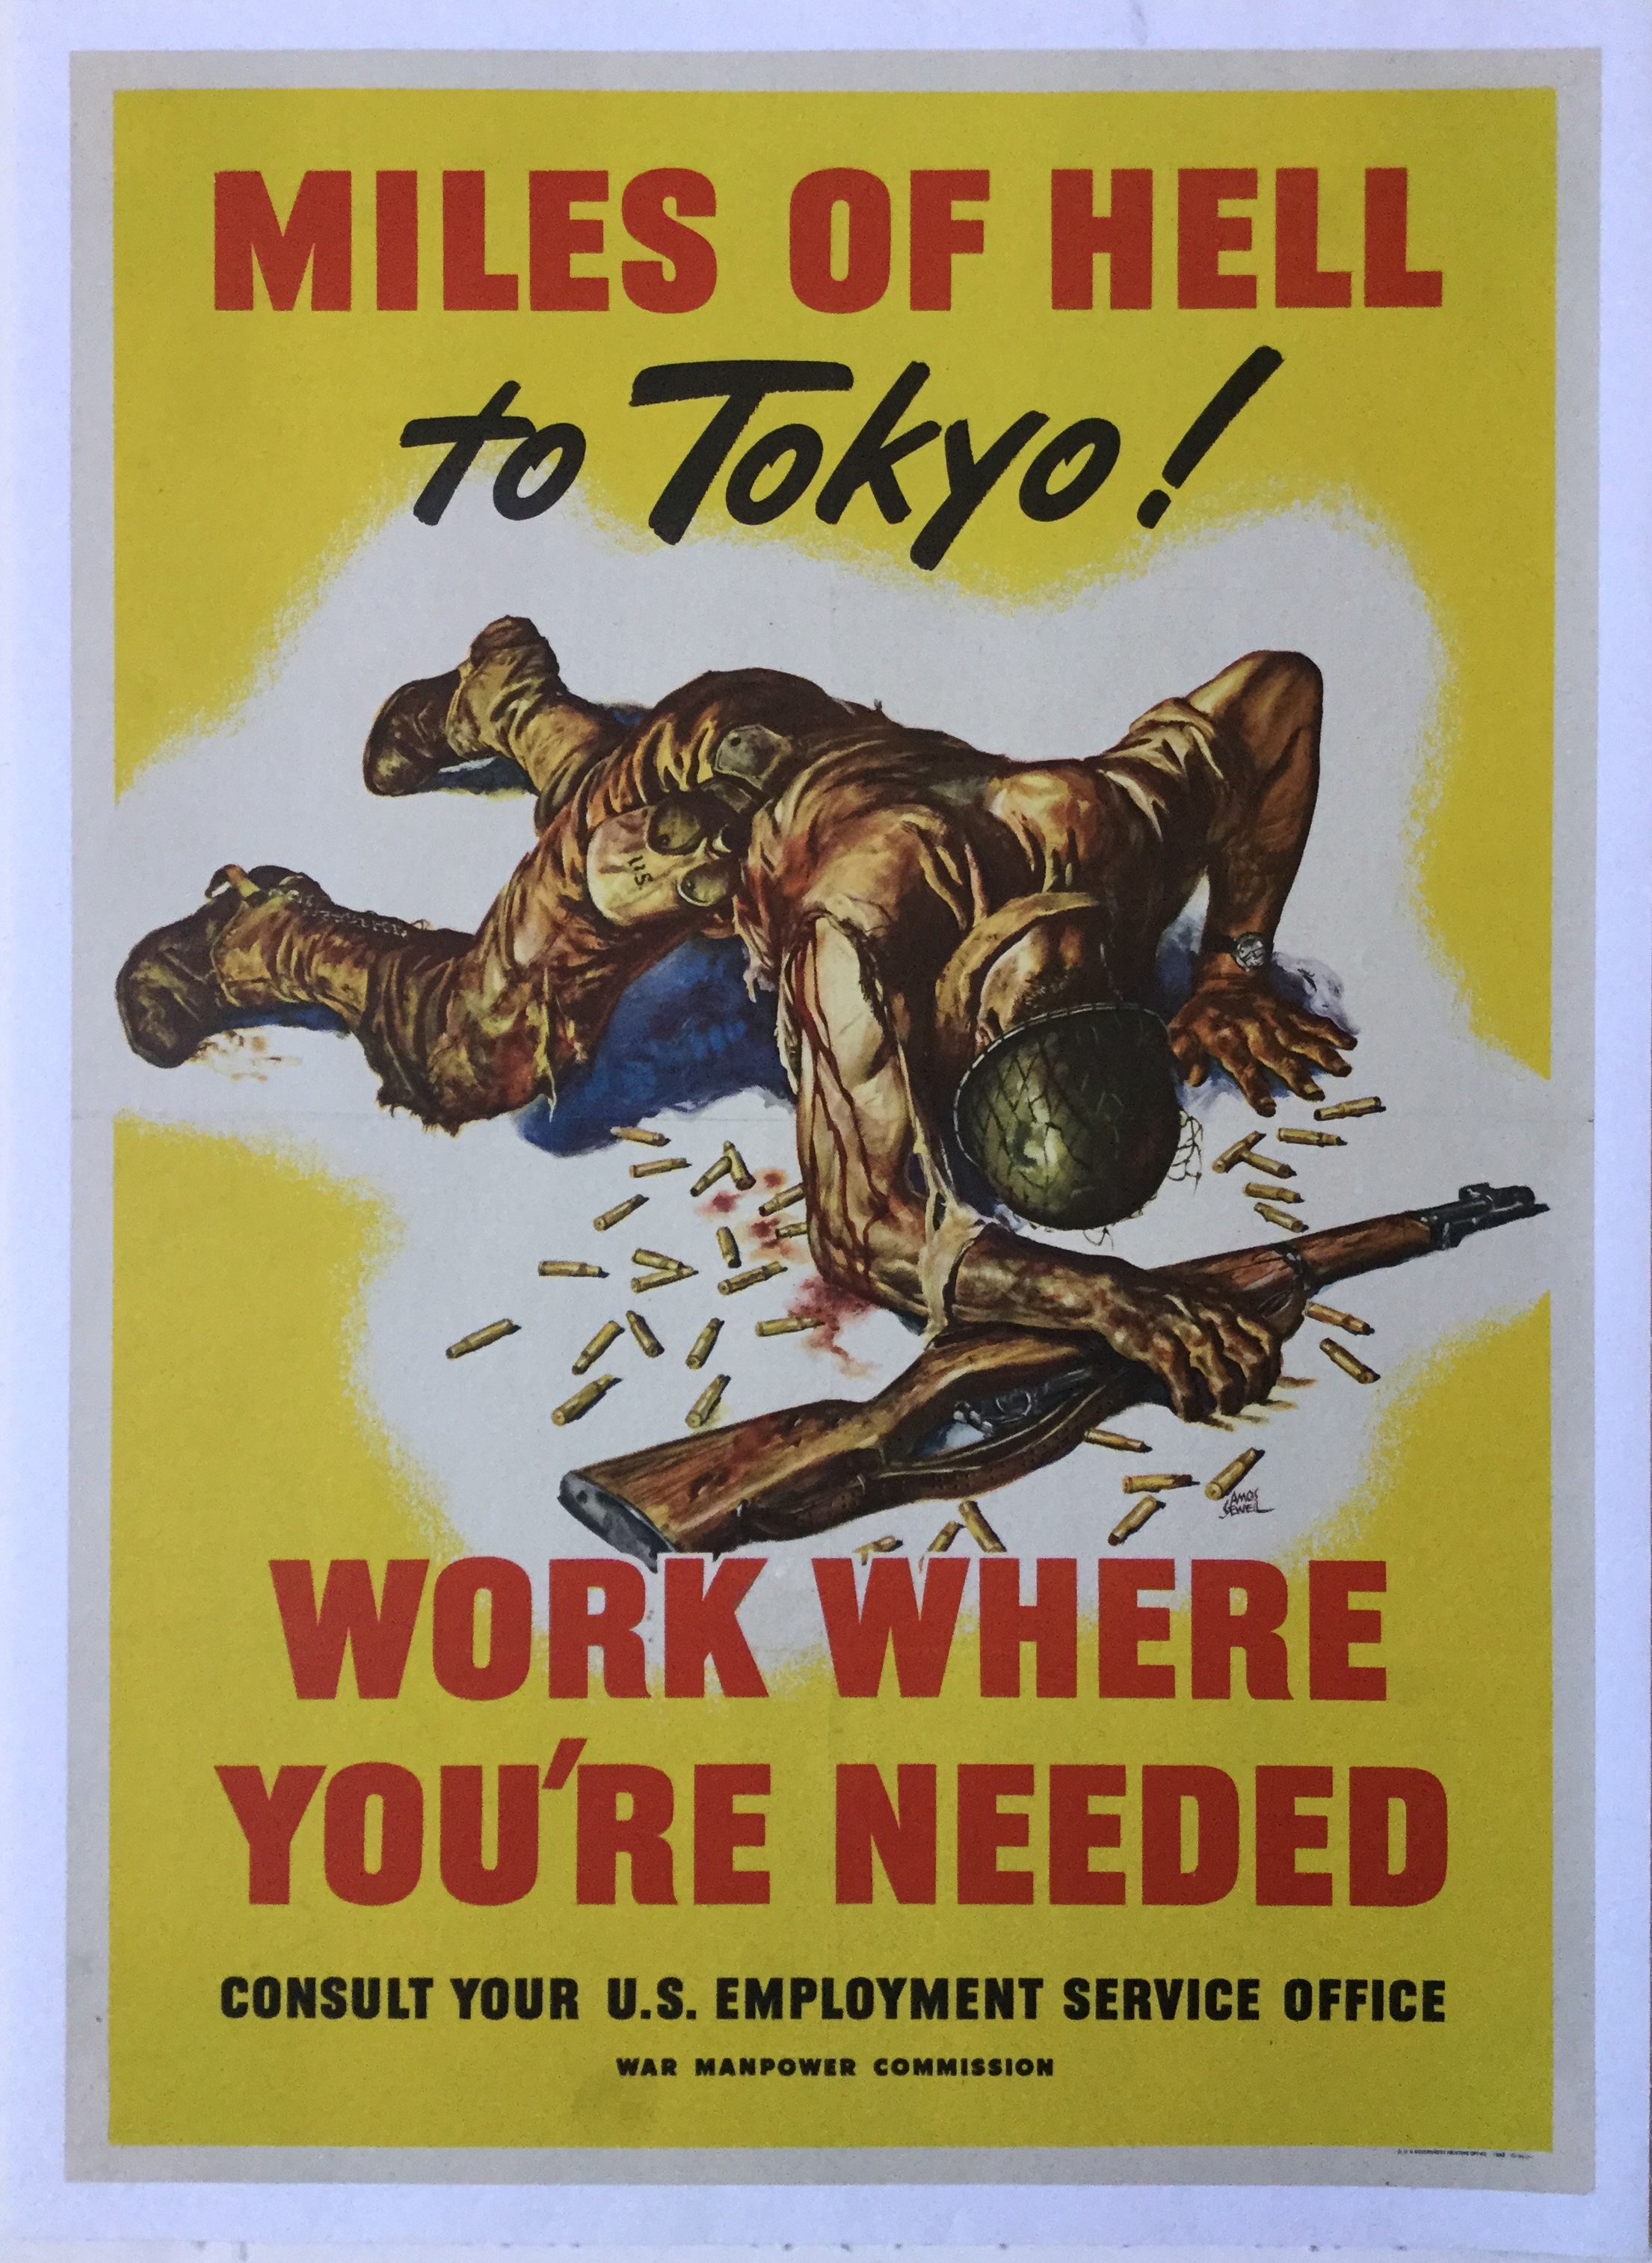 YK0182	MILES OF HELL TO TOKYO! WORK WHERE YOU'RE NEEDED